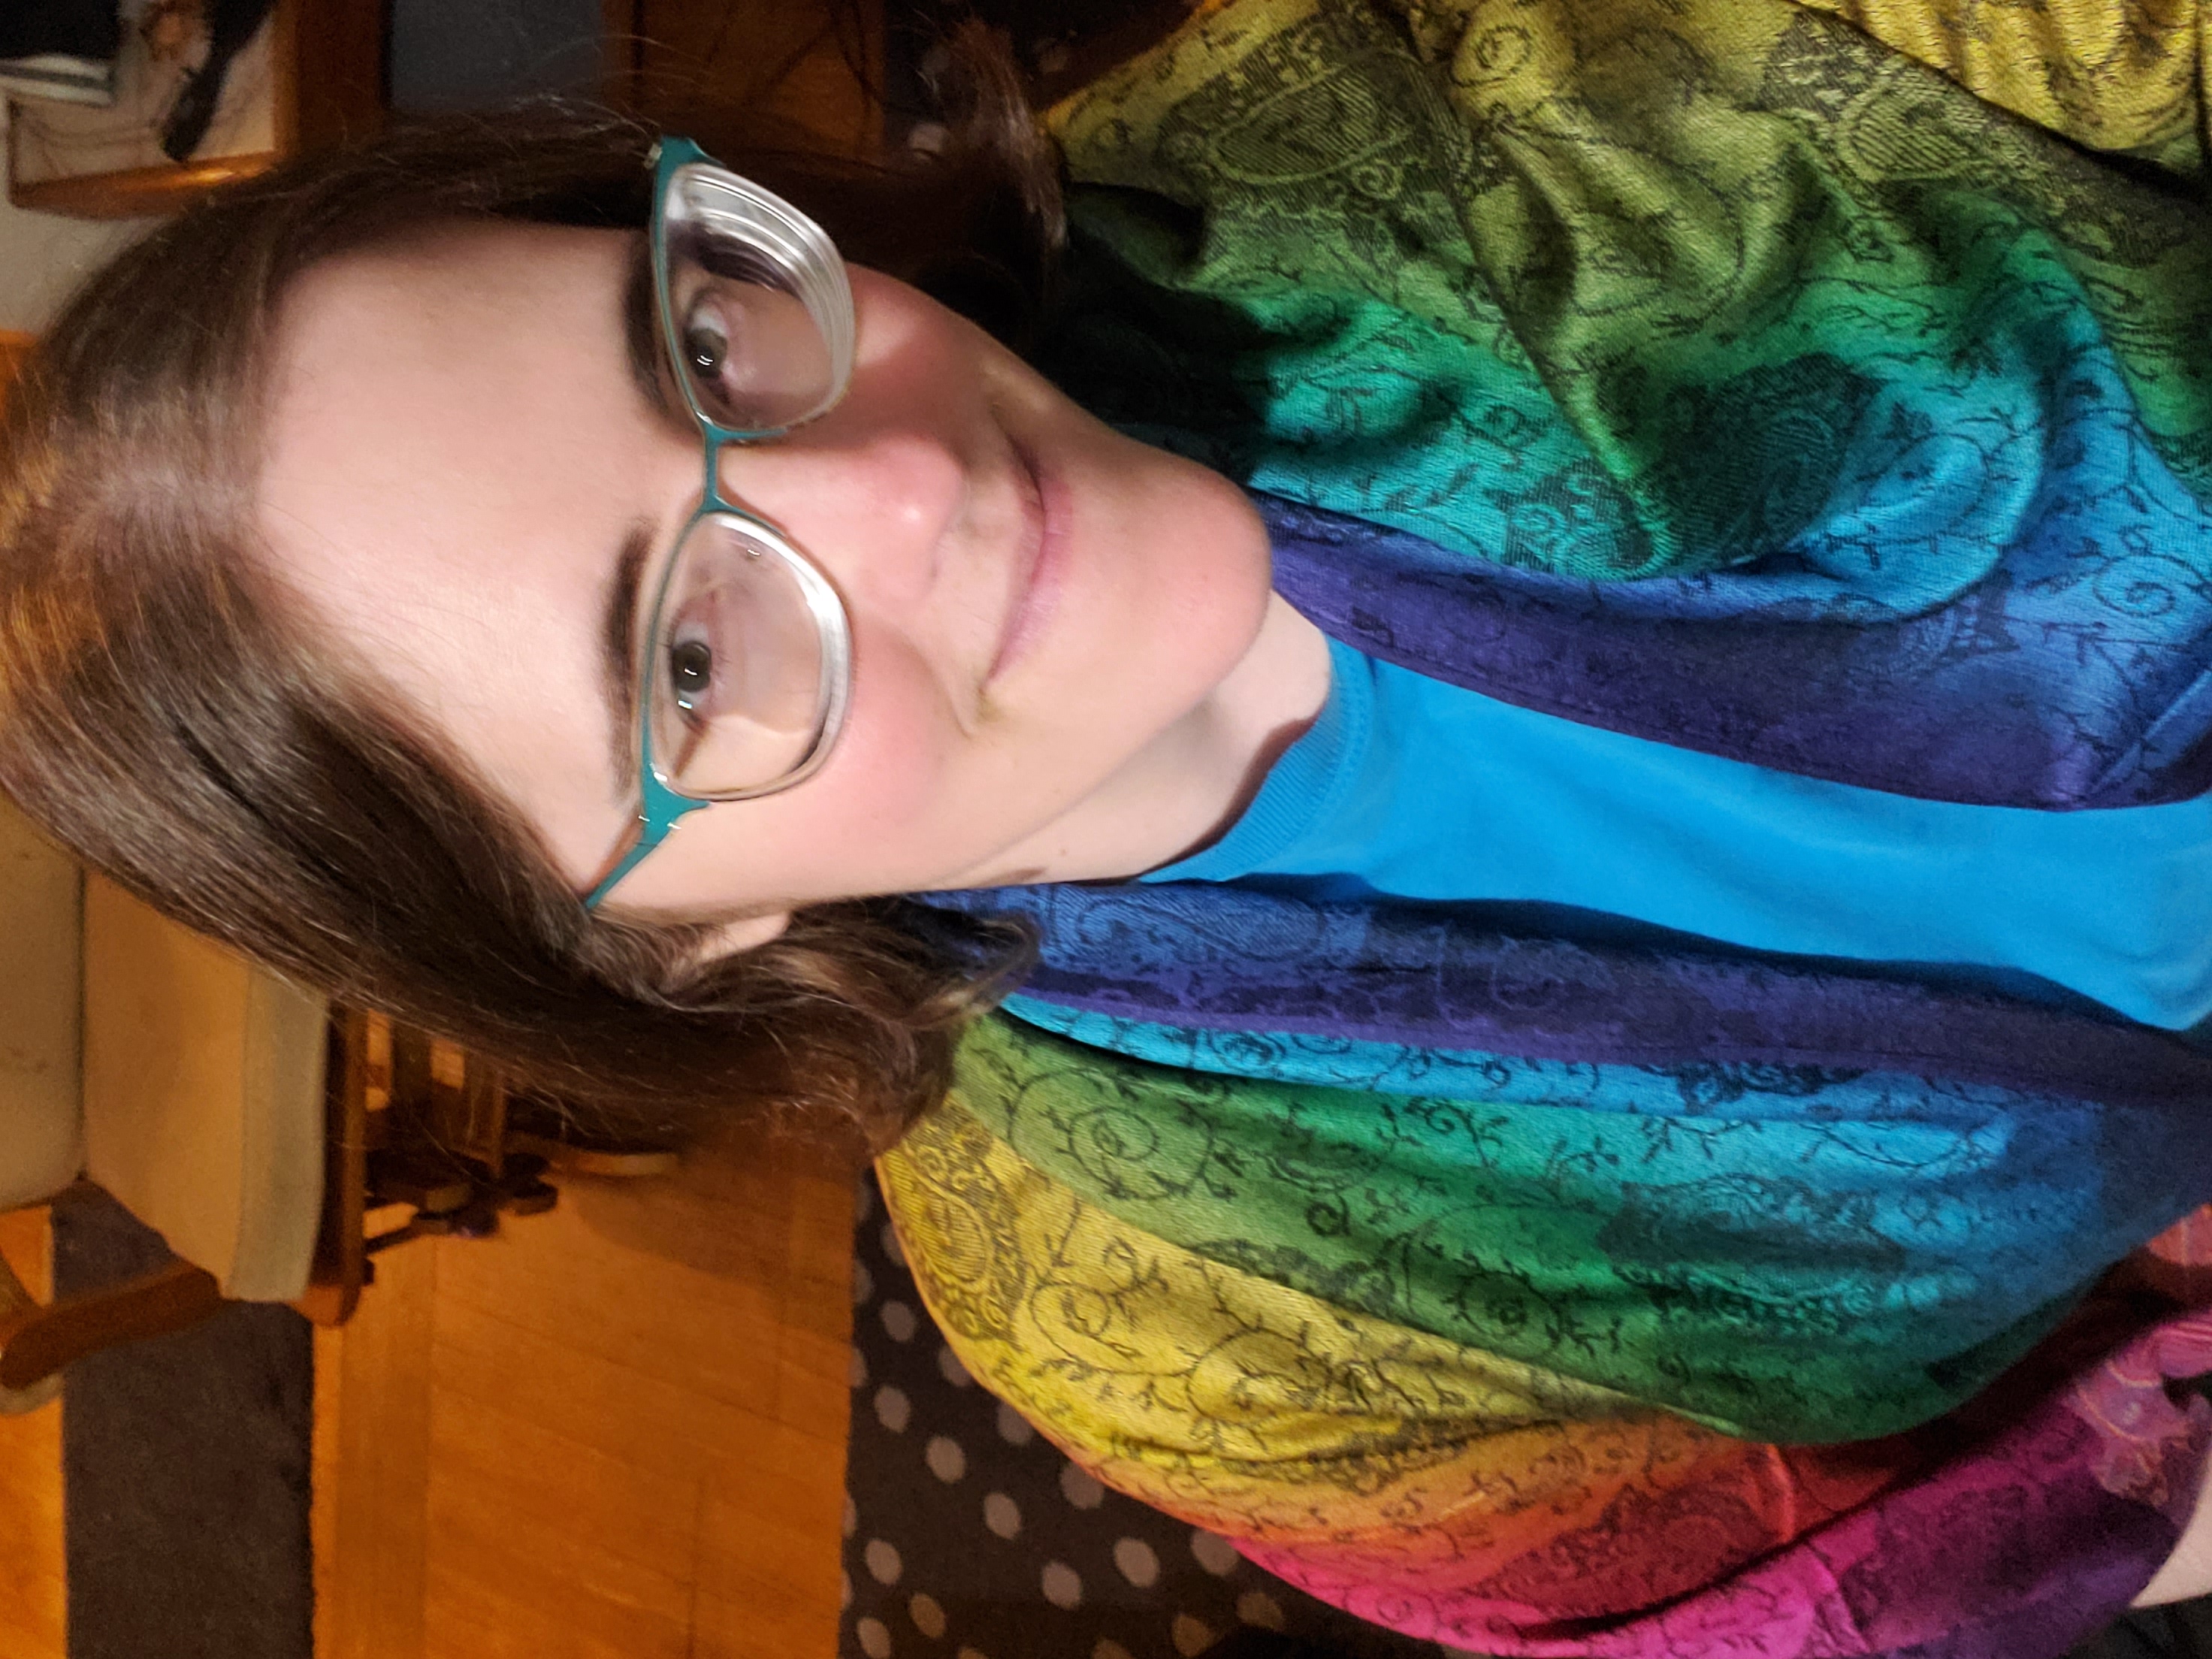 A selfie of the author. A white woman with medium brown hair and glasses looks up towards the viewer with a playful smile. She is wearing a bright blue shirt and is wrapped in a bright rainbow pashmina scarf. 